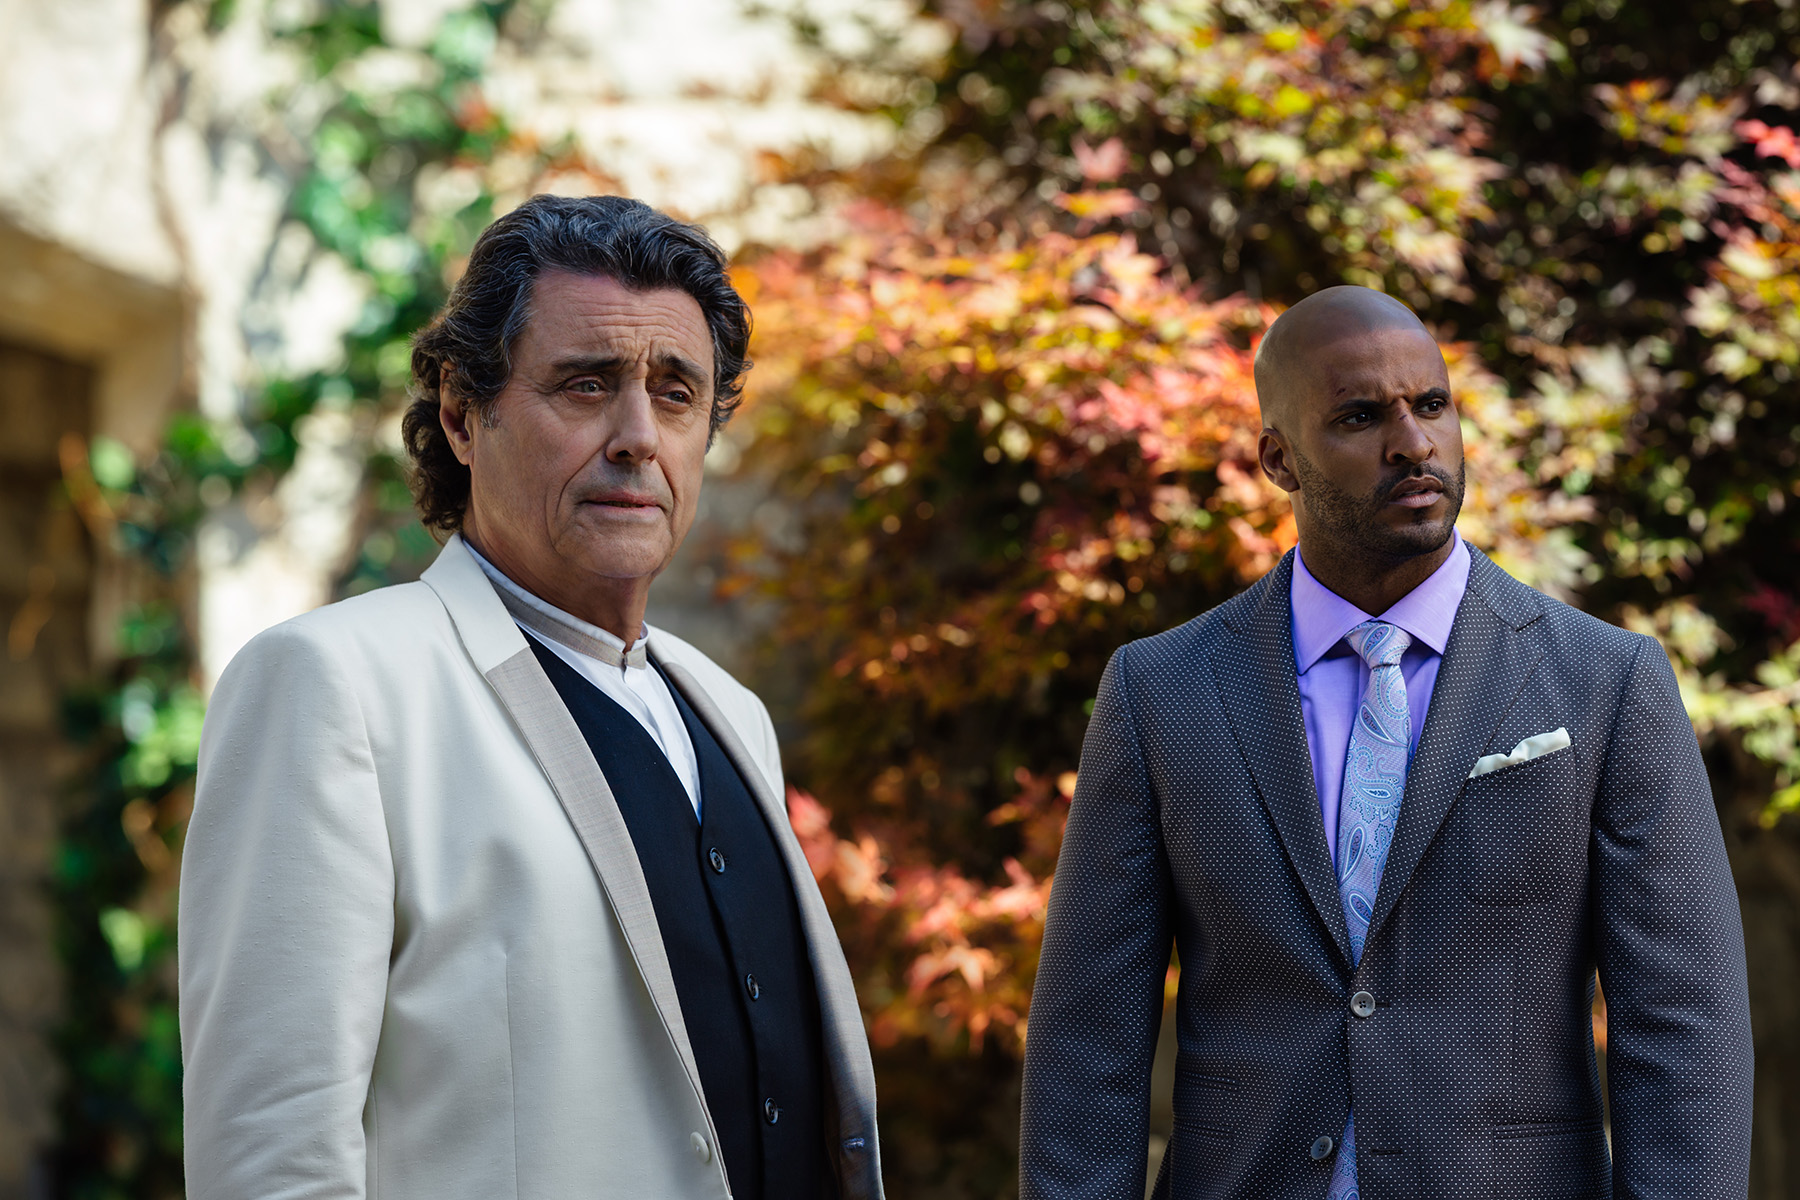 American Gods’ Fantastic First Season Ends With Shock And Awe